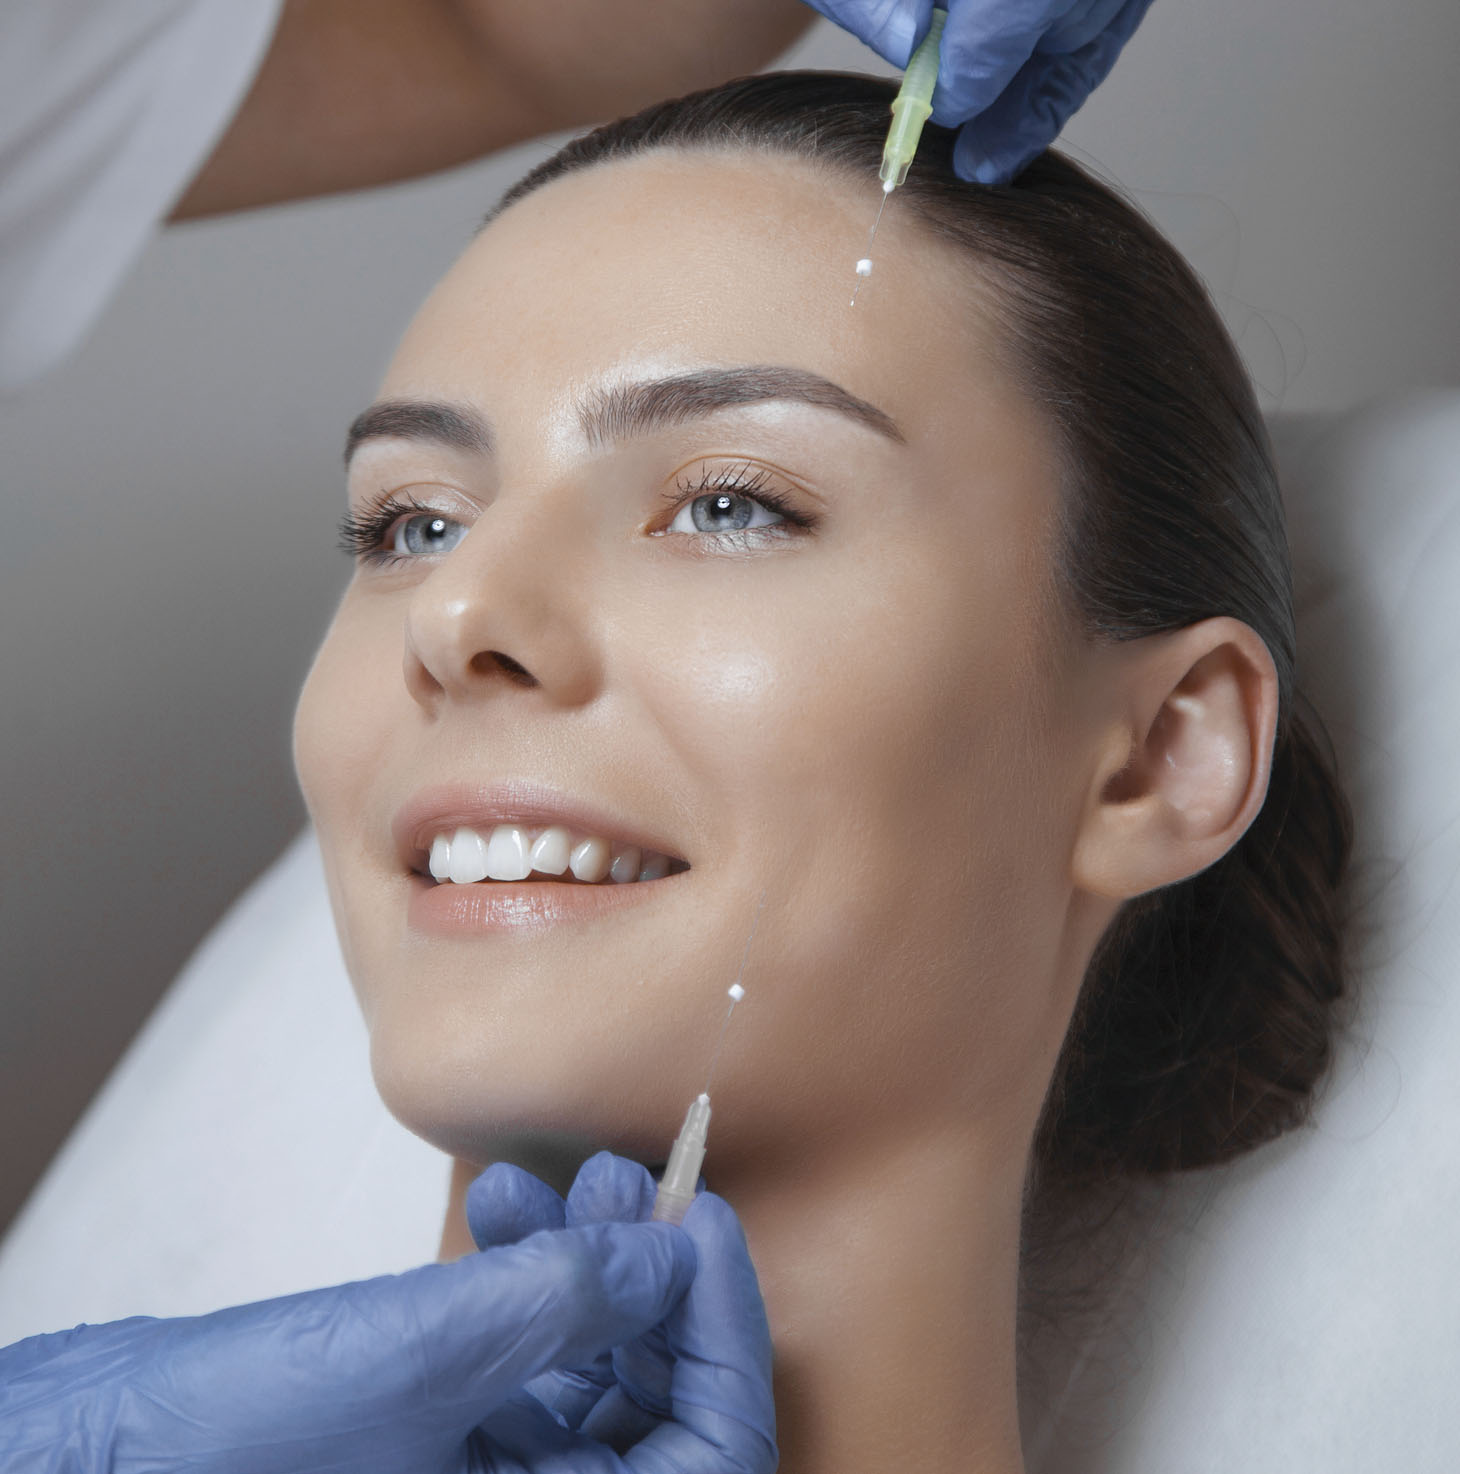 Aesthetic facial surgery, cosmetic technique, face lifting and contouring